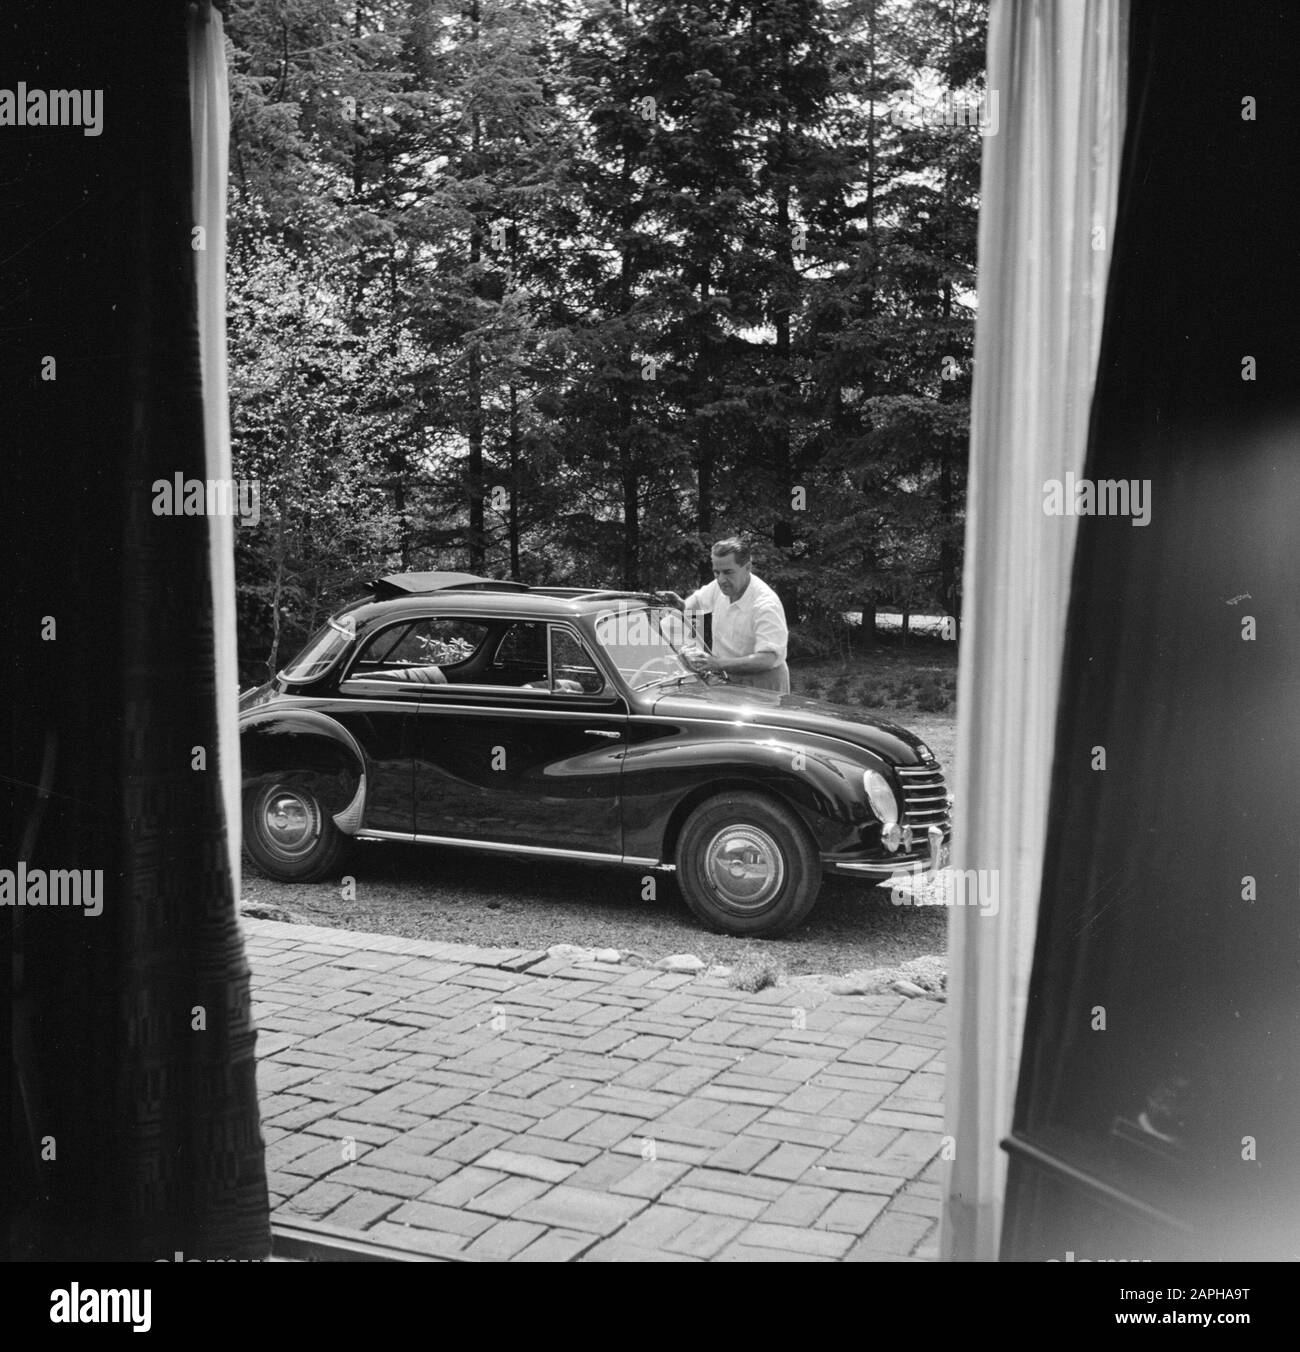 Eduard van Beinum at his country house Description: The conductor Eduard van Beinum washes the windshield of his open DKW at his country house Bergsham in Garderen Date: 5 June 1954 Location: Garderen, Gelderland Keywords: cars, conductors, exteriors, country houses Personal name: Beinum, Eduard van Stock Photo